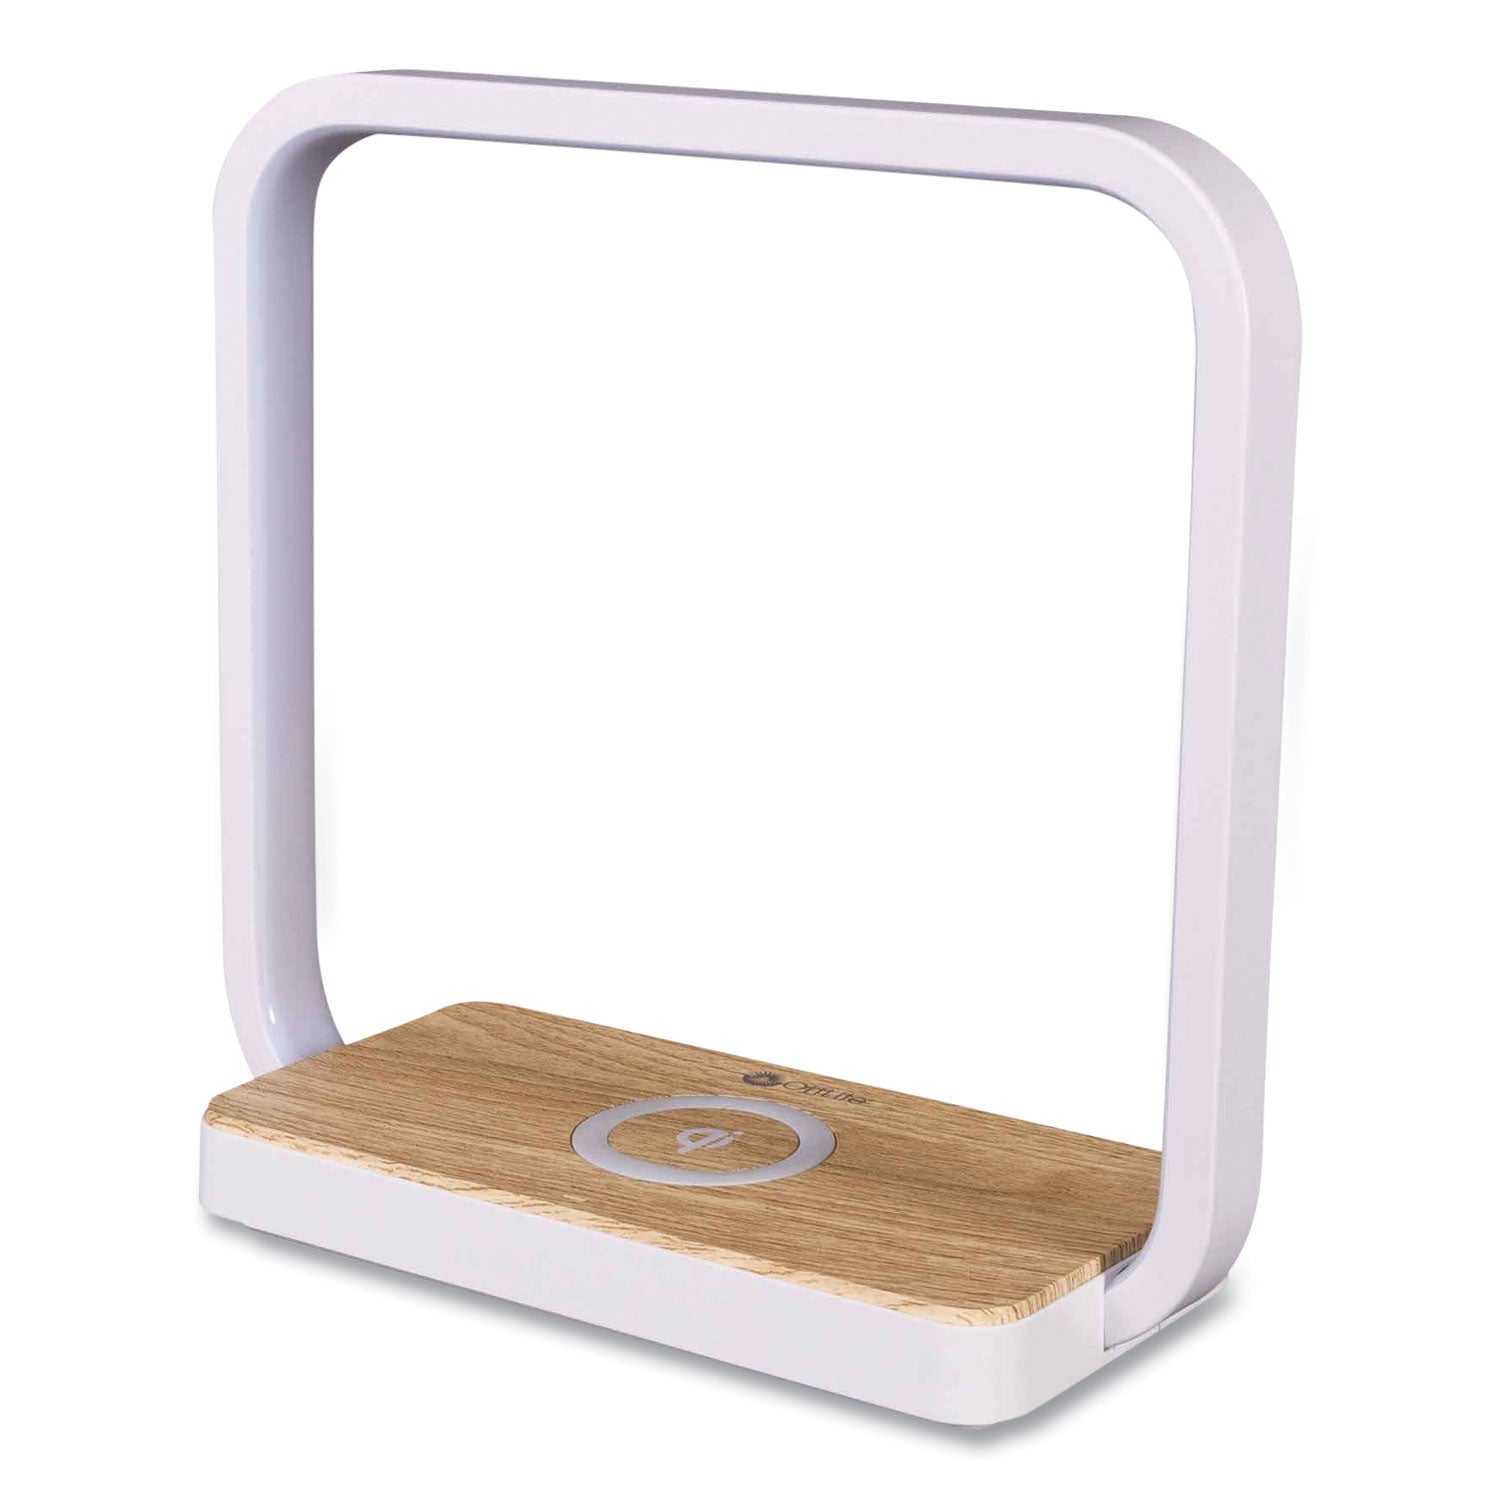 wireless-charging-station-with-night-light-usb-white-ships-in-4-6-business-days_otti0342qshpr - 1